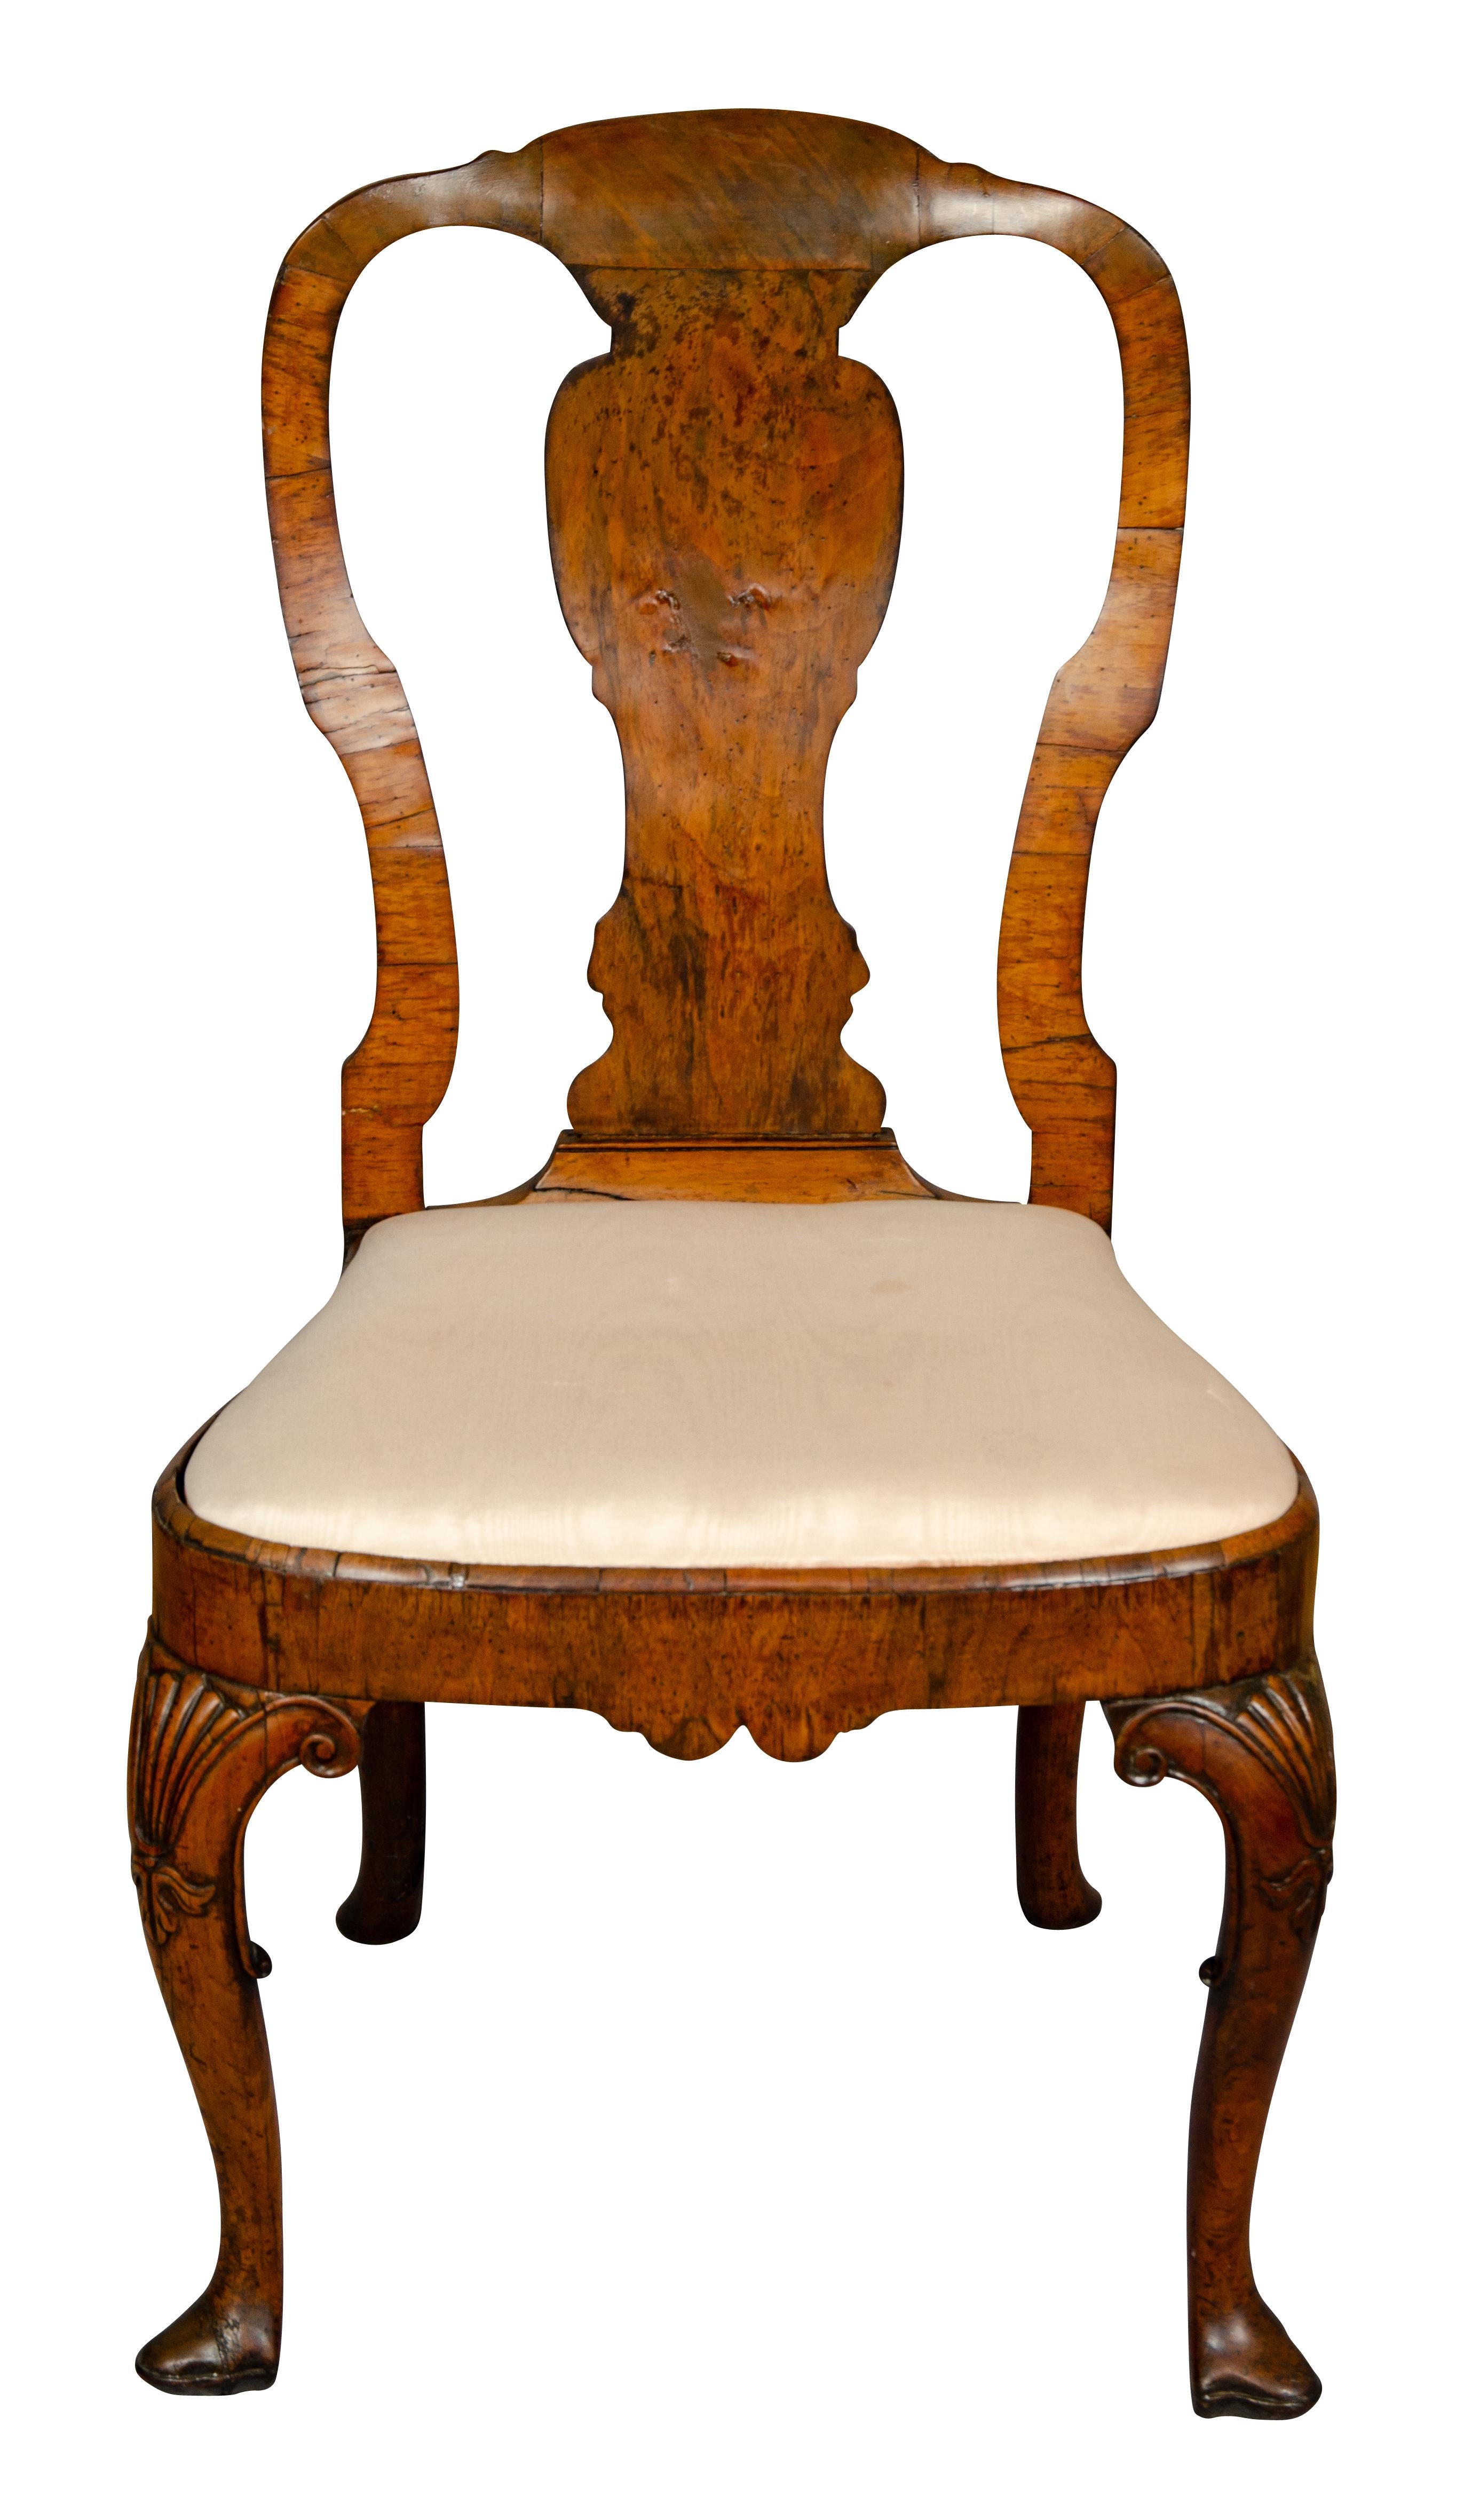 From a Bellevue Ave Newport family. Wonderful simple proportions. Arched back with central vasiform splat, balloon drop in seat, raised on cabriole legs with carved knees ending on pad feet.